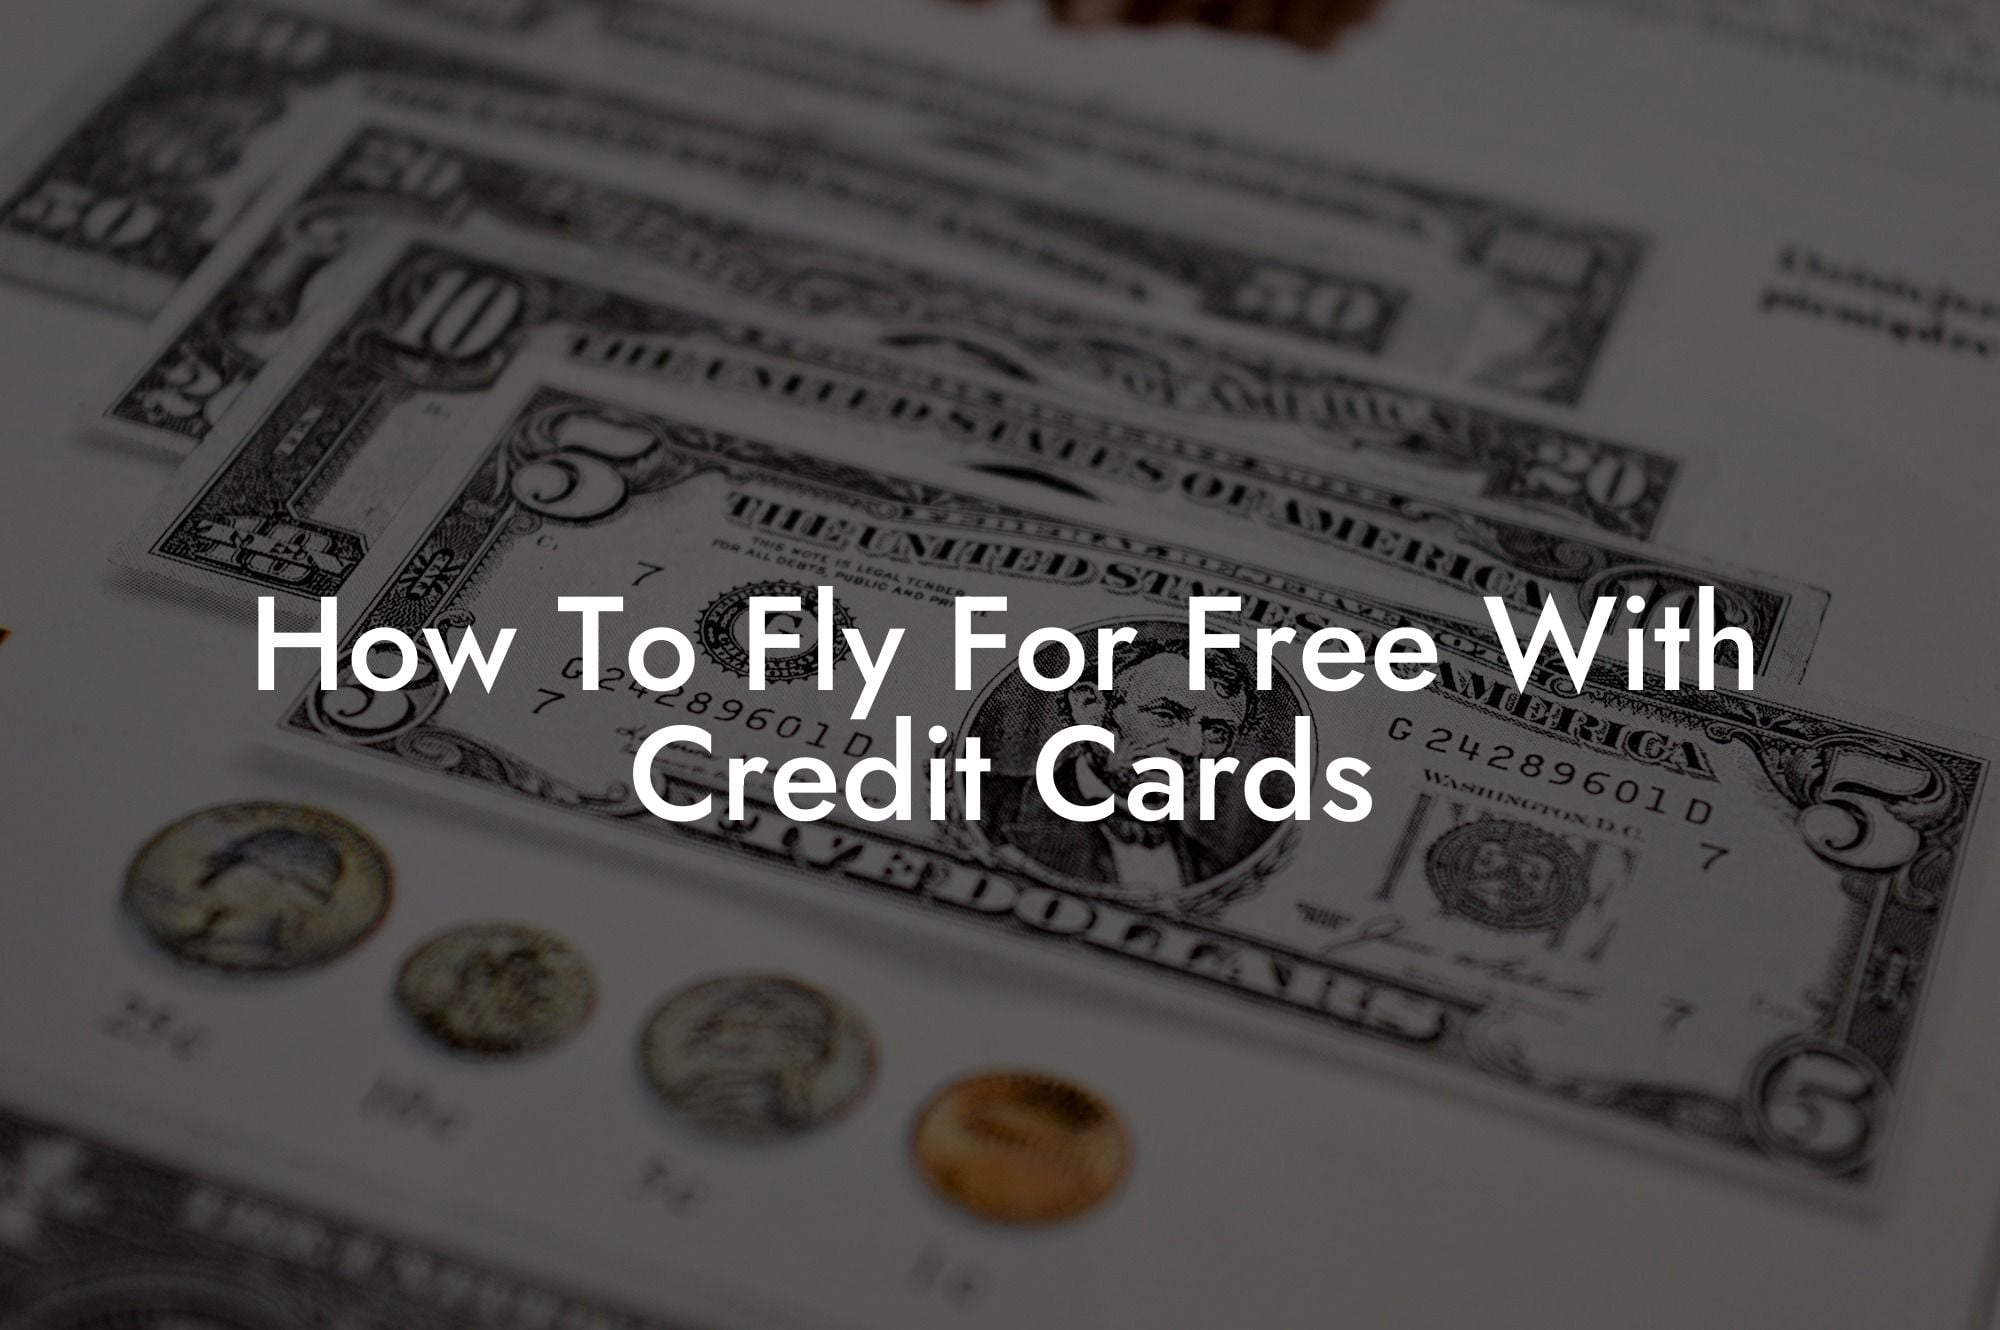 How To Fly For Free With Credit Cards